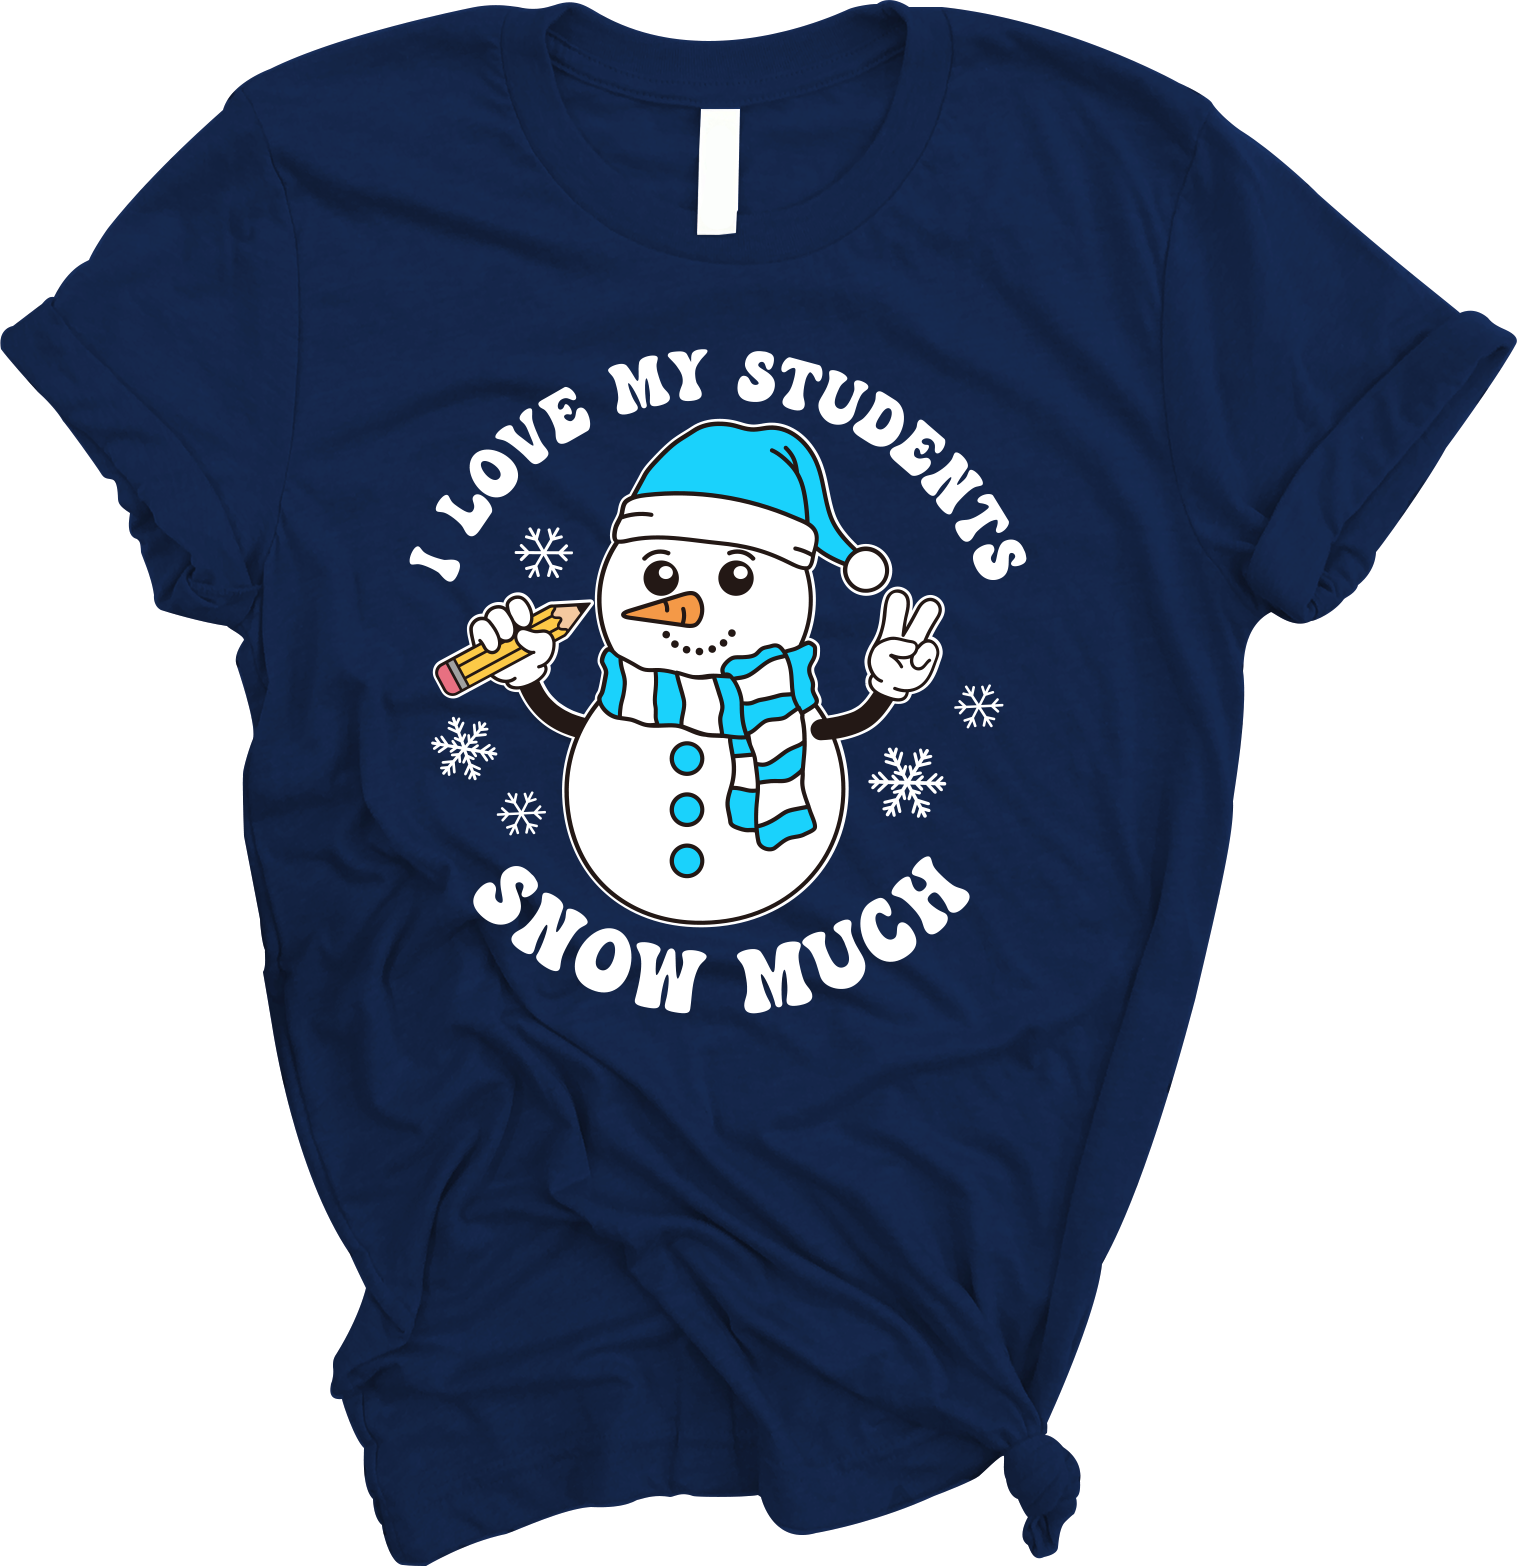 "I Love My Students SNOW Much" Tee